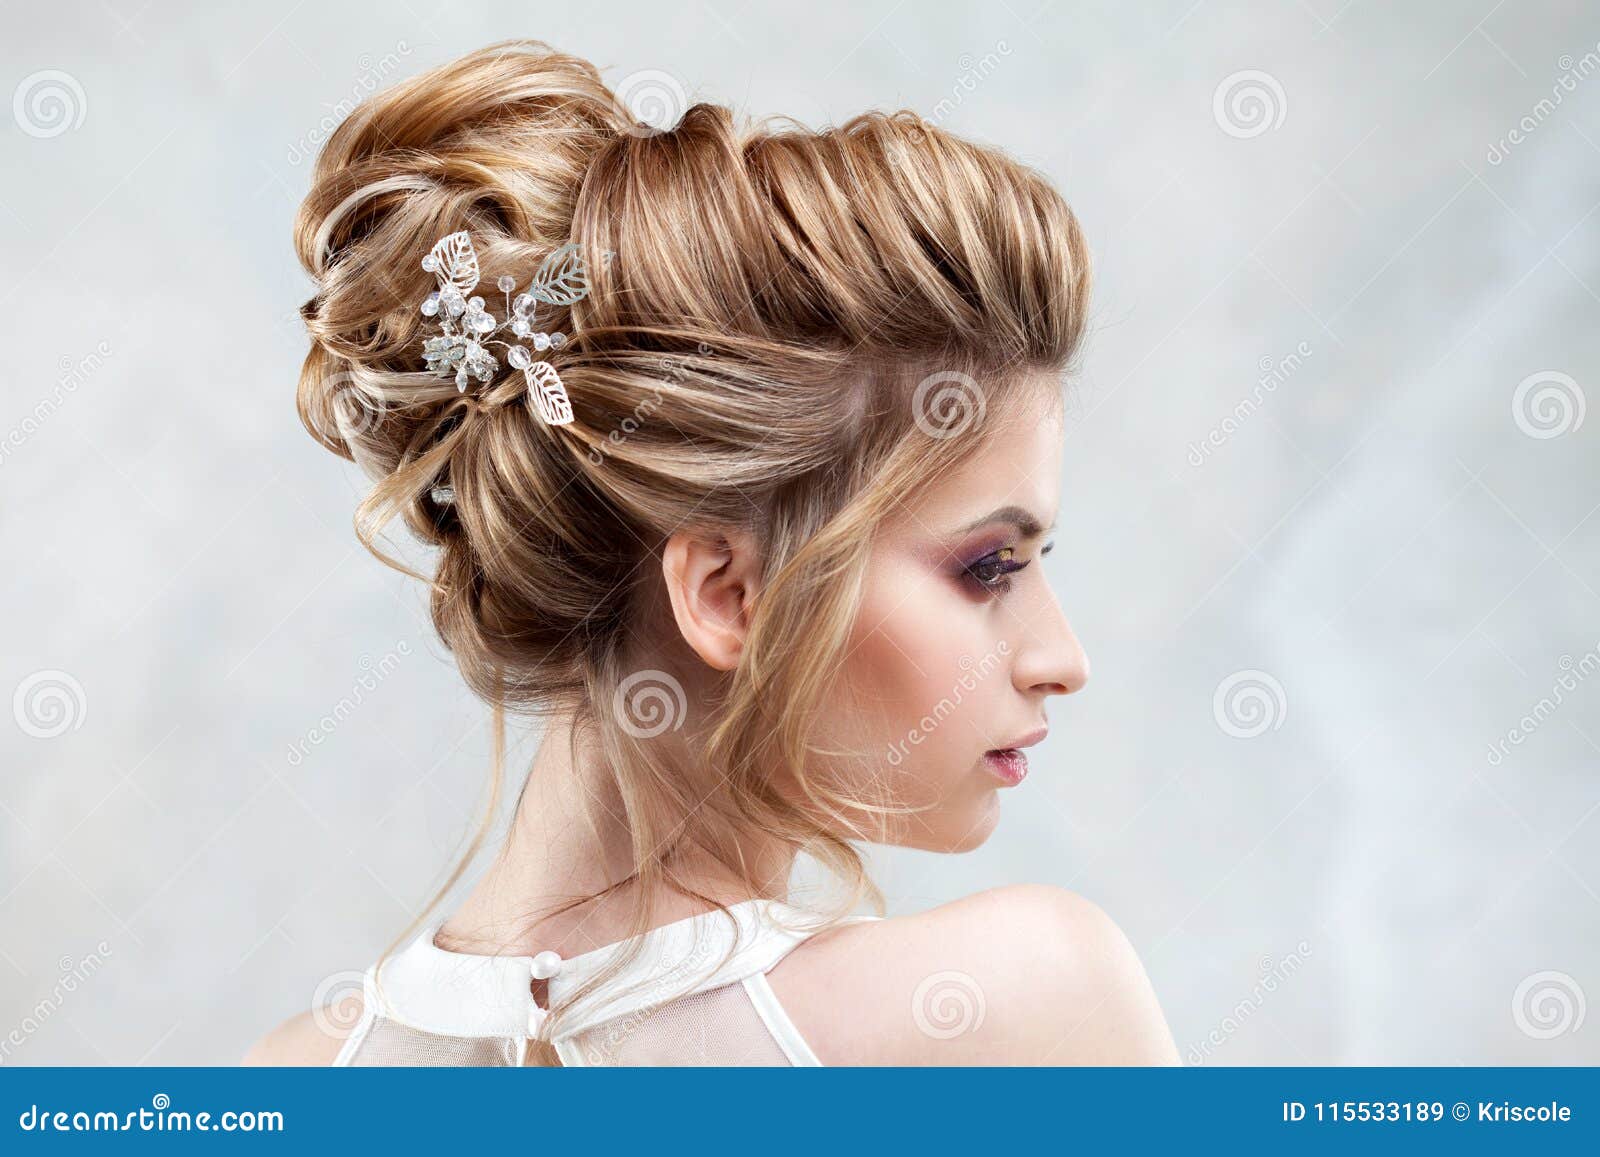 Young Beautiful Bride with an Elegant High Hairdo. Wedding Hairstyle with  the Accessory in Her Hair Stock Image - Image of love, hair: 115533189